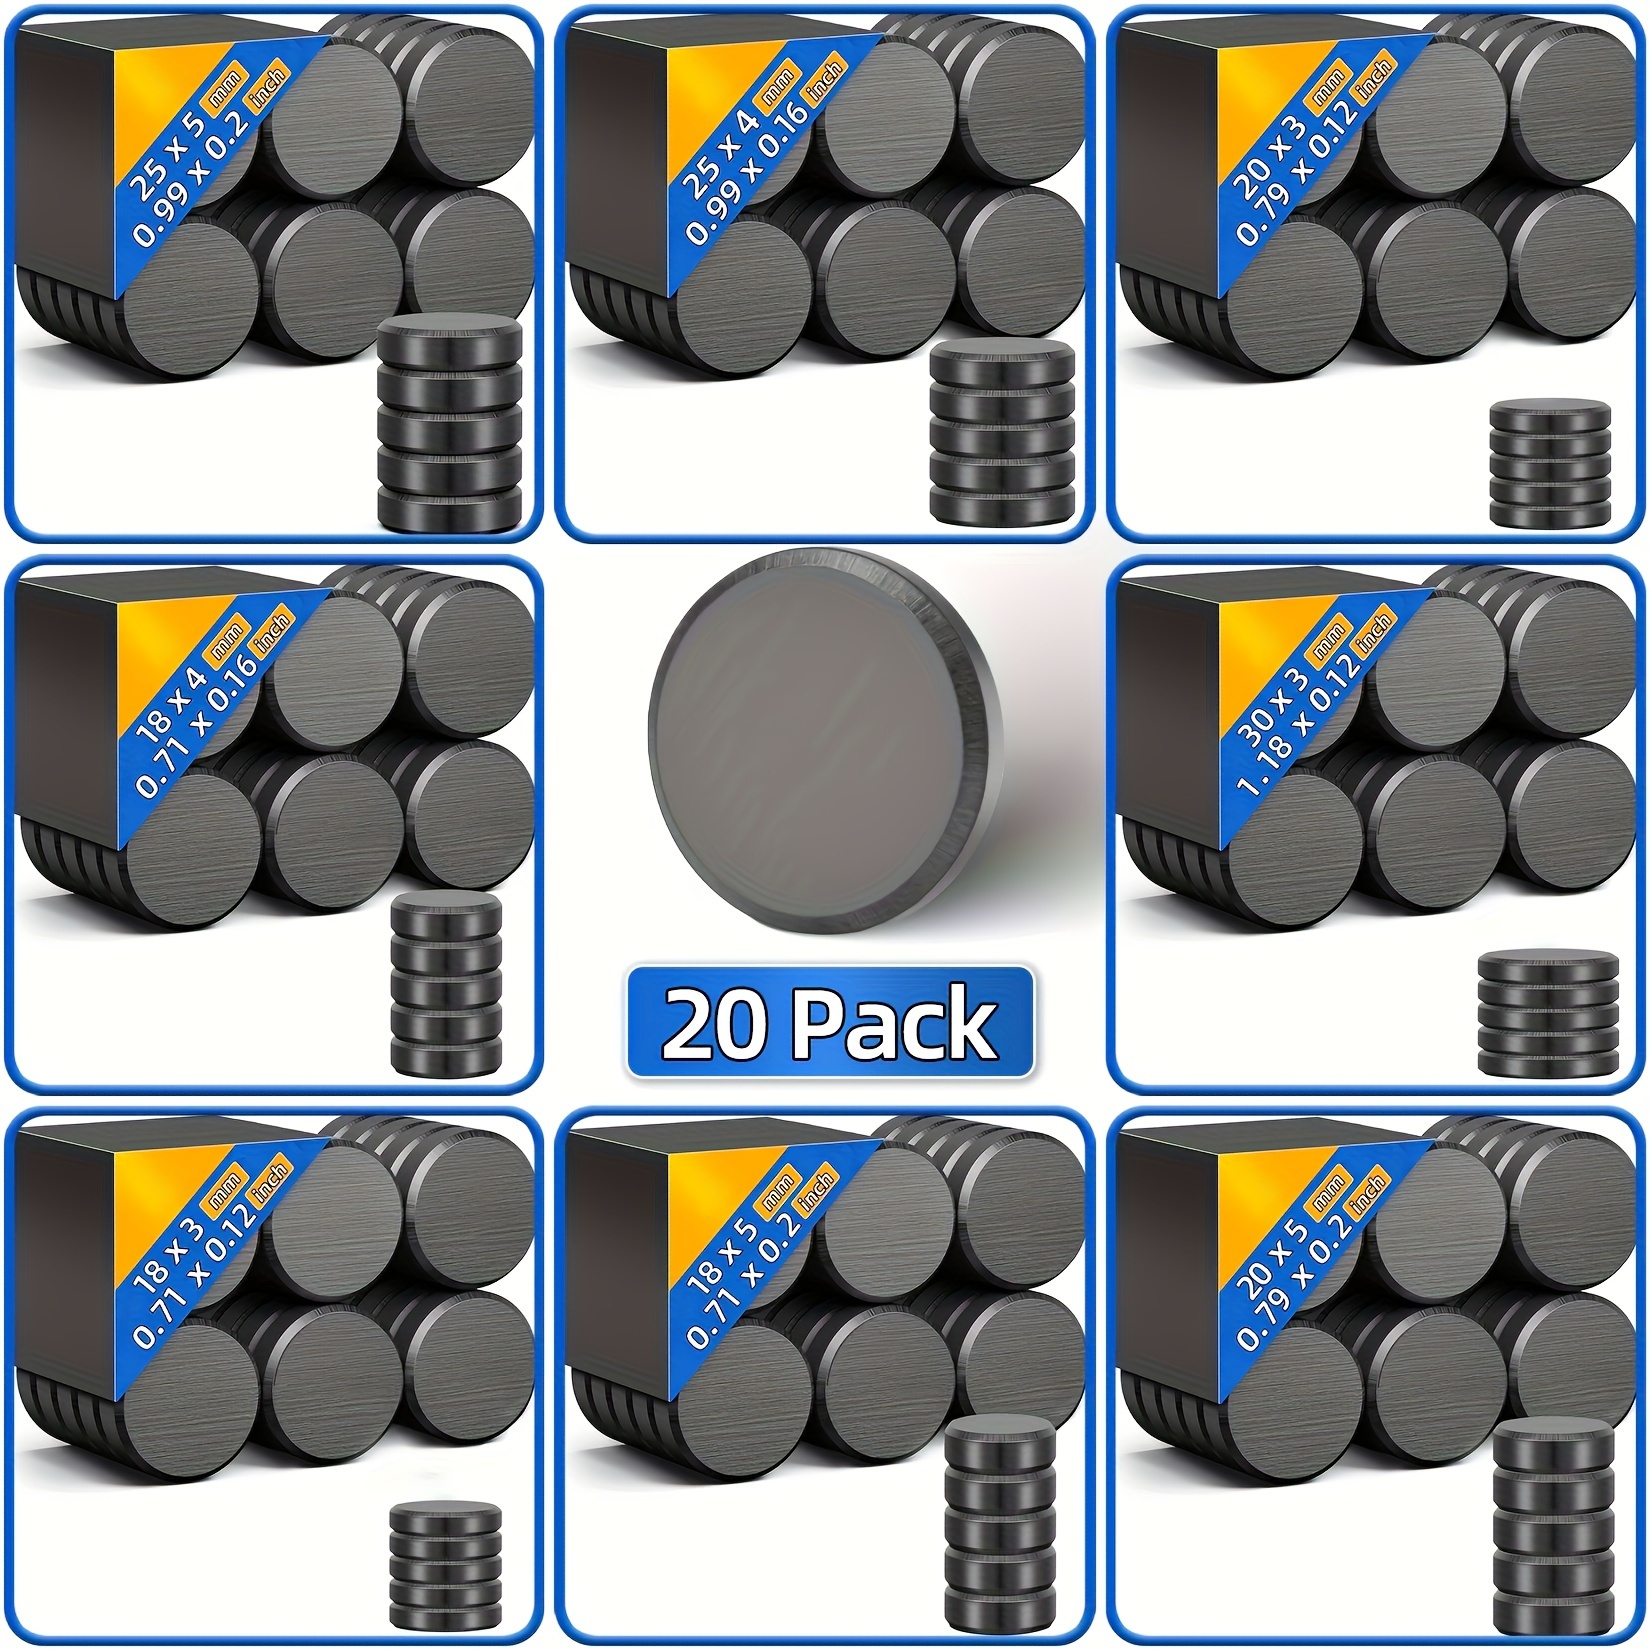 

20pcs Black Industrial Magnets, Craft Magnets, Strong Round Magnets For Button Magnet Craft Science Projects -0.7*0.12inch(18*3mm)